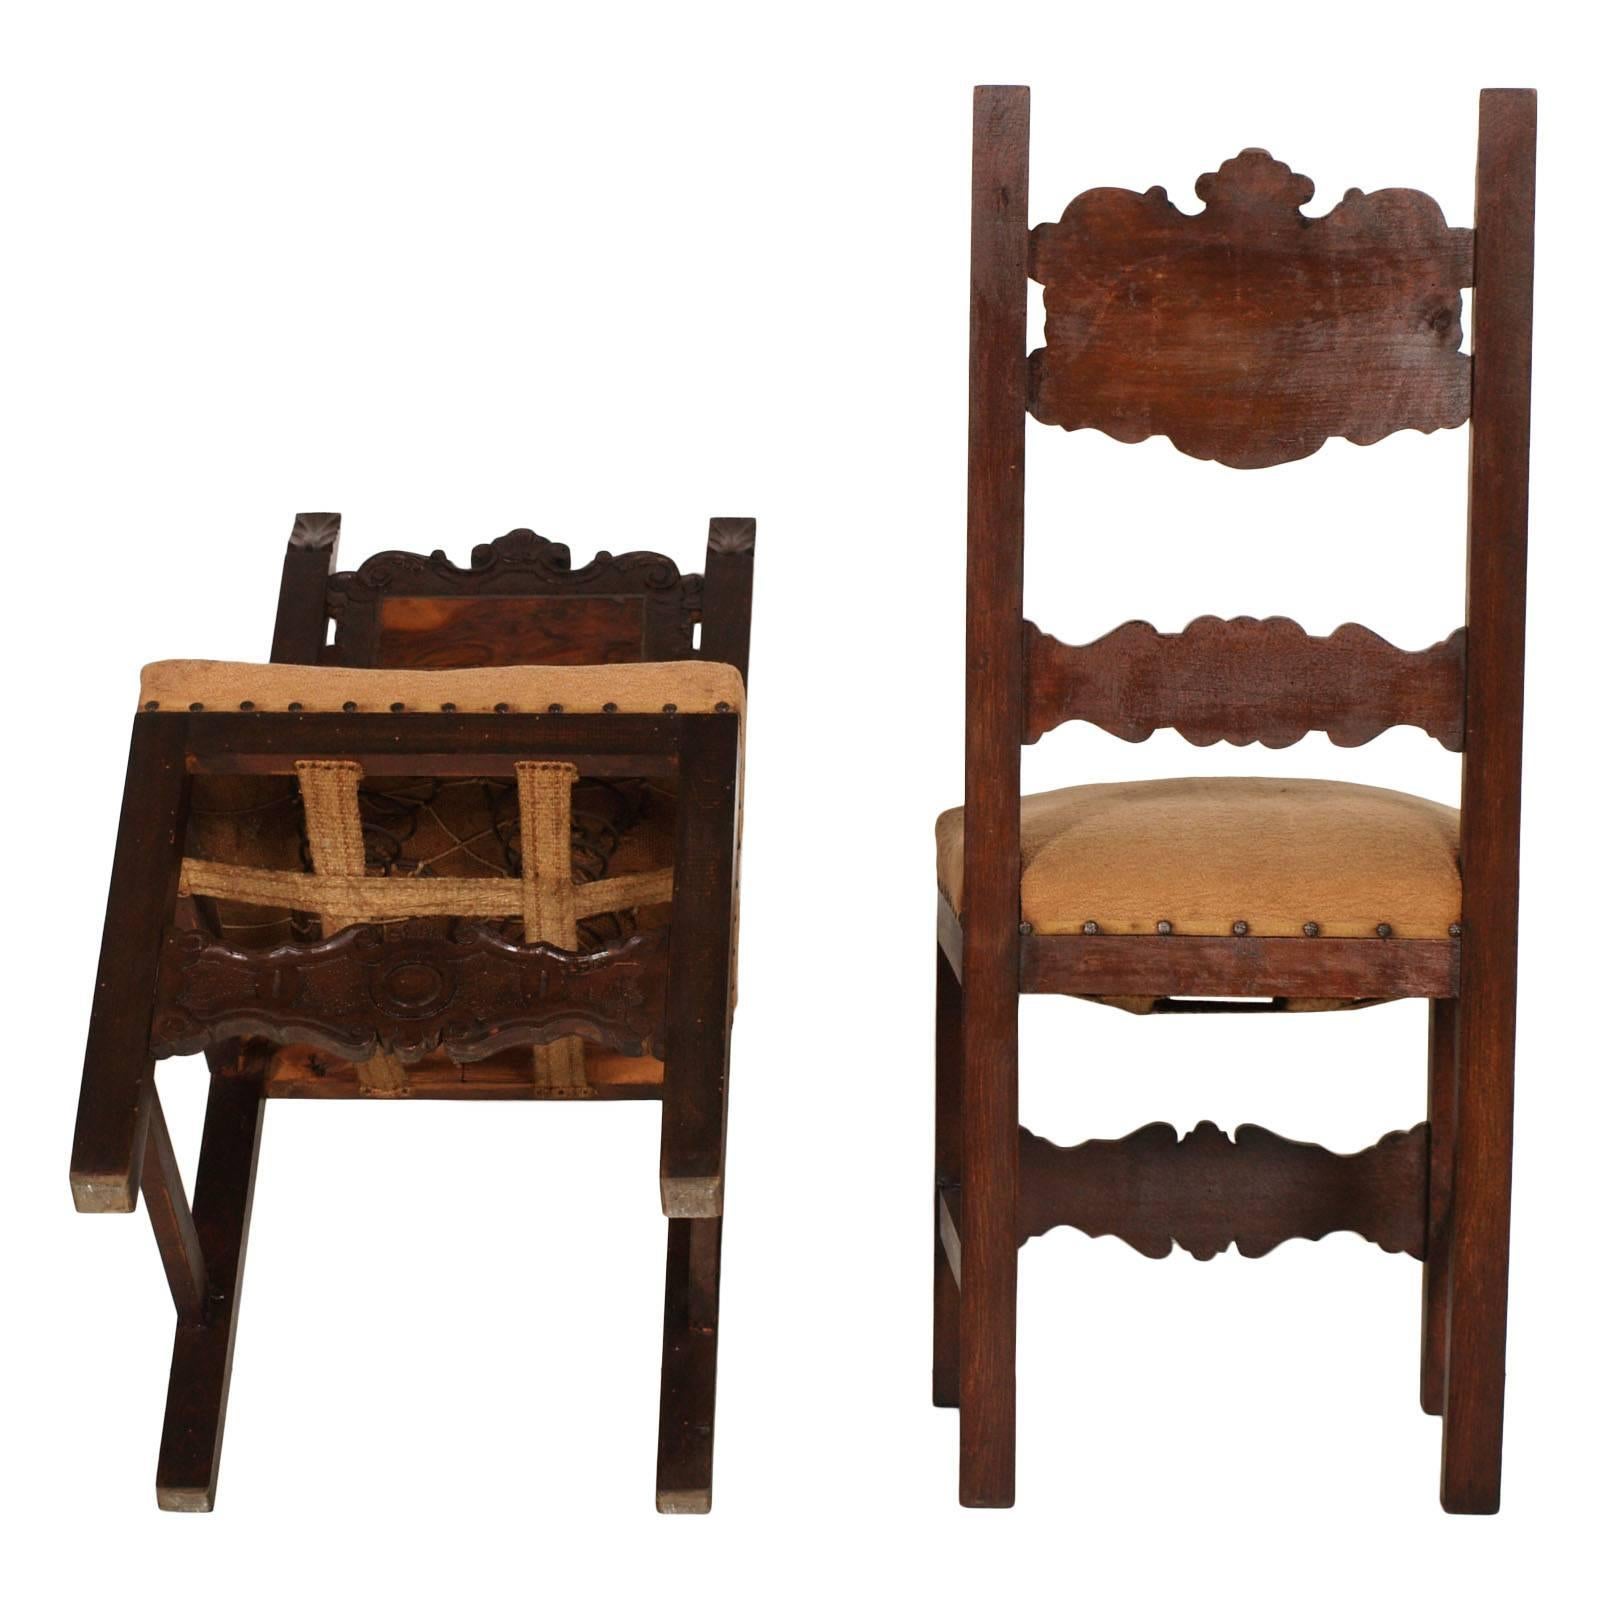 Tuscany 19th Century Renaissance Table with Six Chairs, Hand-Carved Walnut For Sale 5